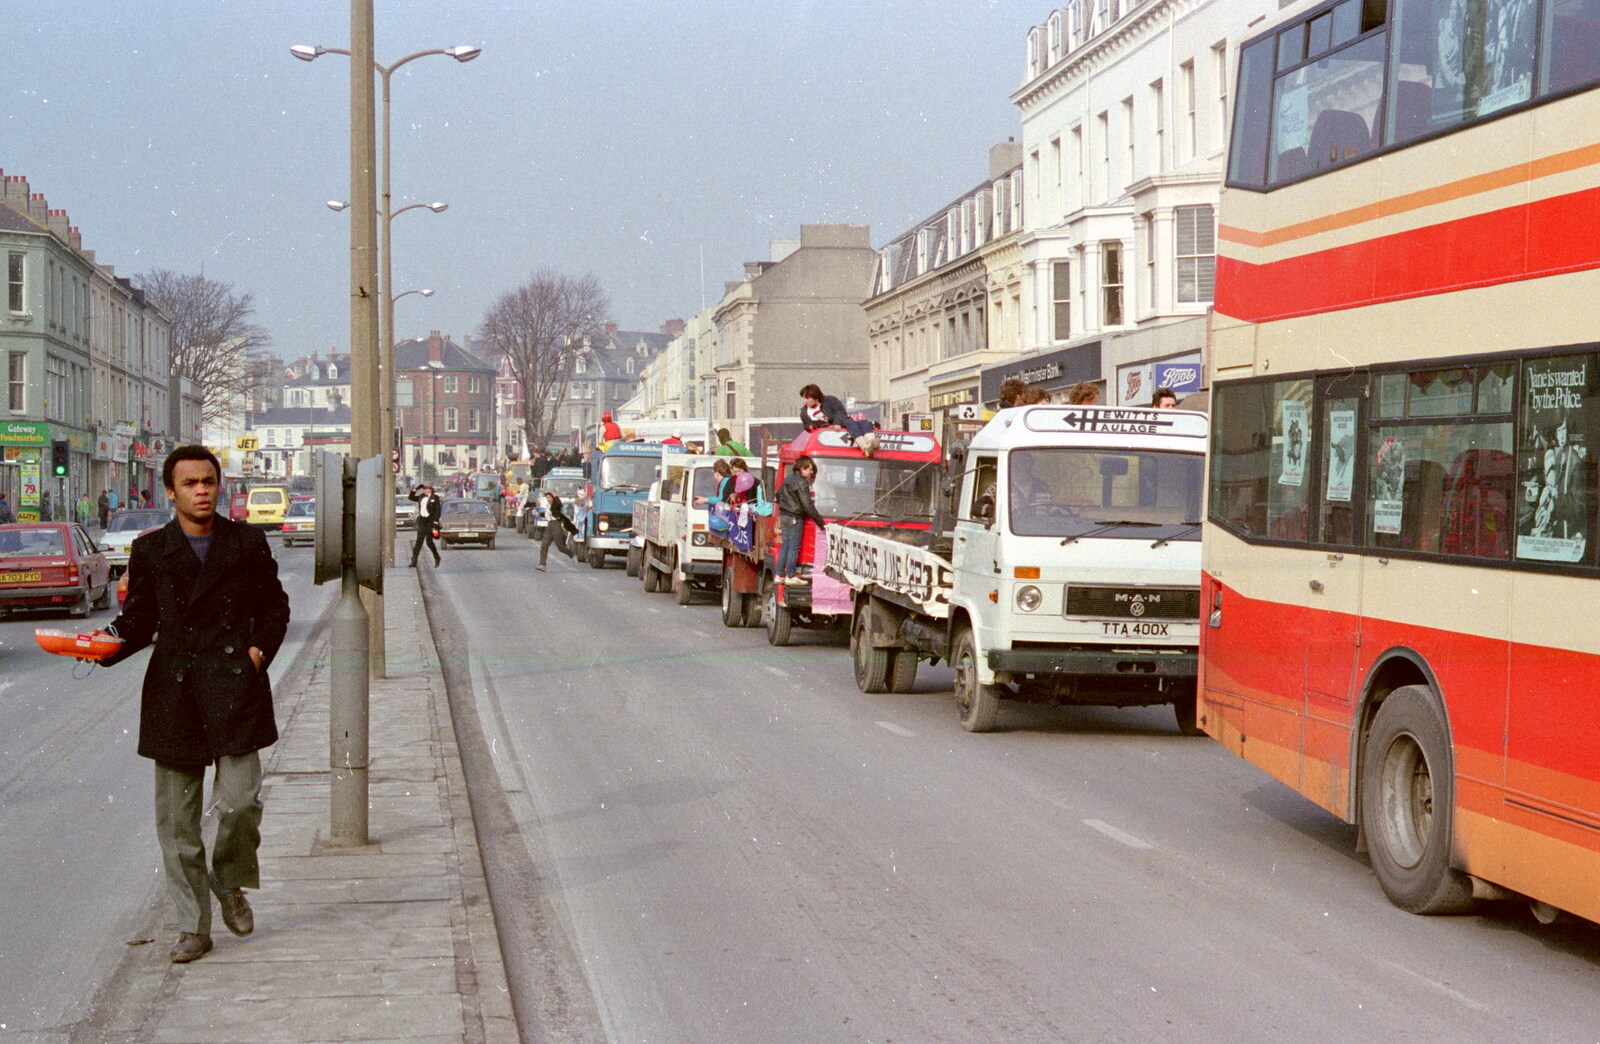 Simon Bento on the central resevation on Mutley Plain from Uni: PPSU "Jazz" RAG Street Parade, Plymouth, Devon - 17th February 1986